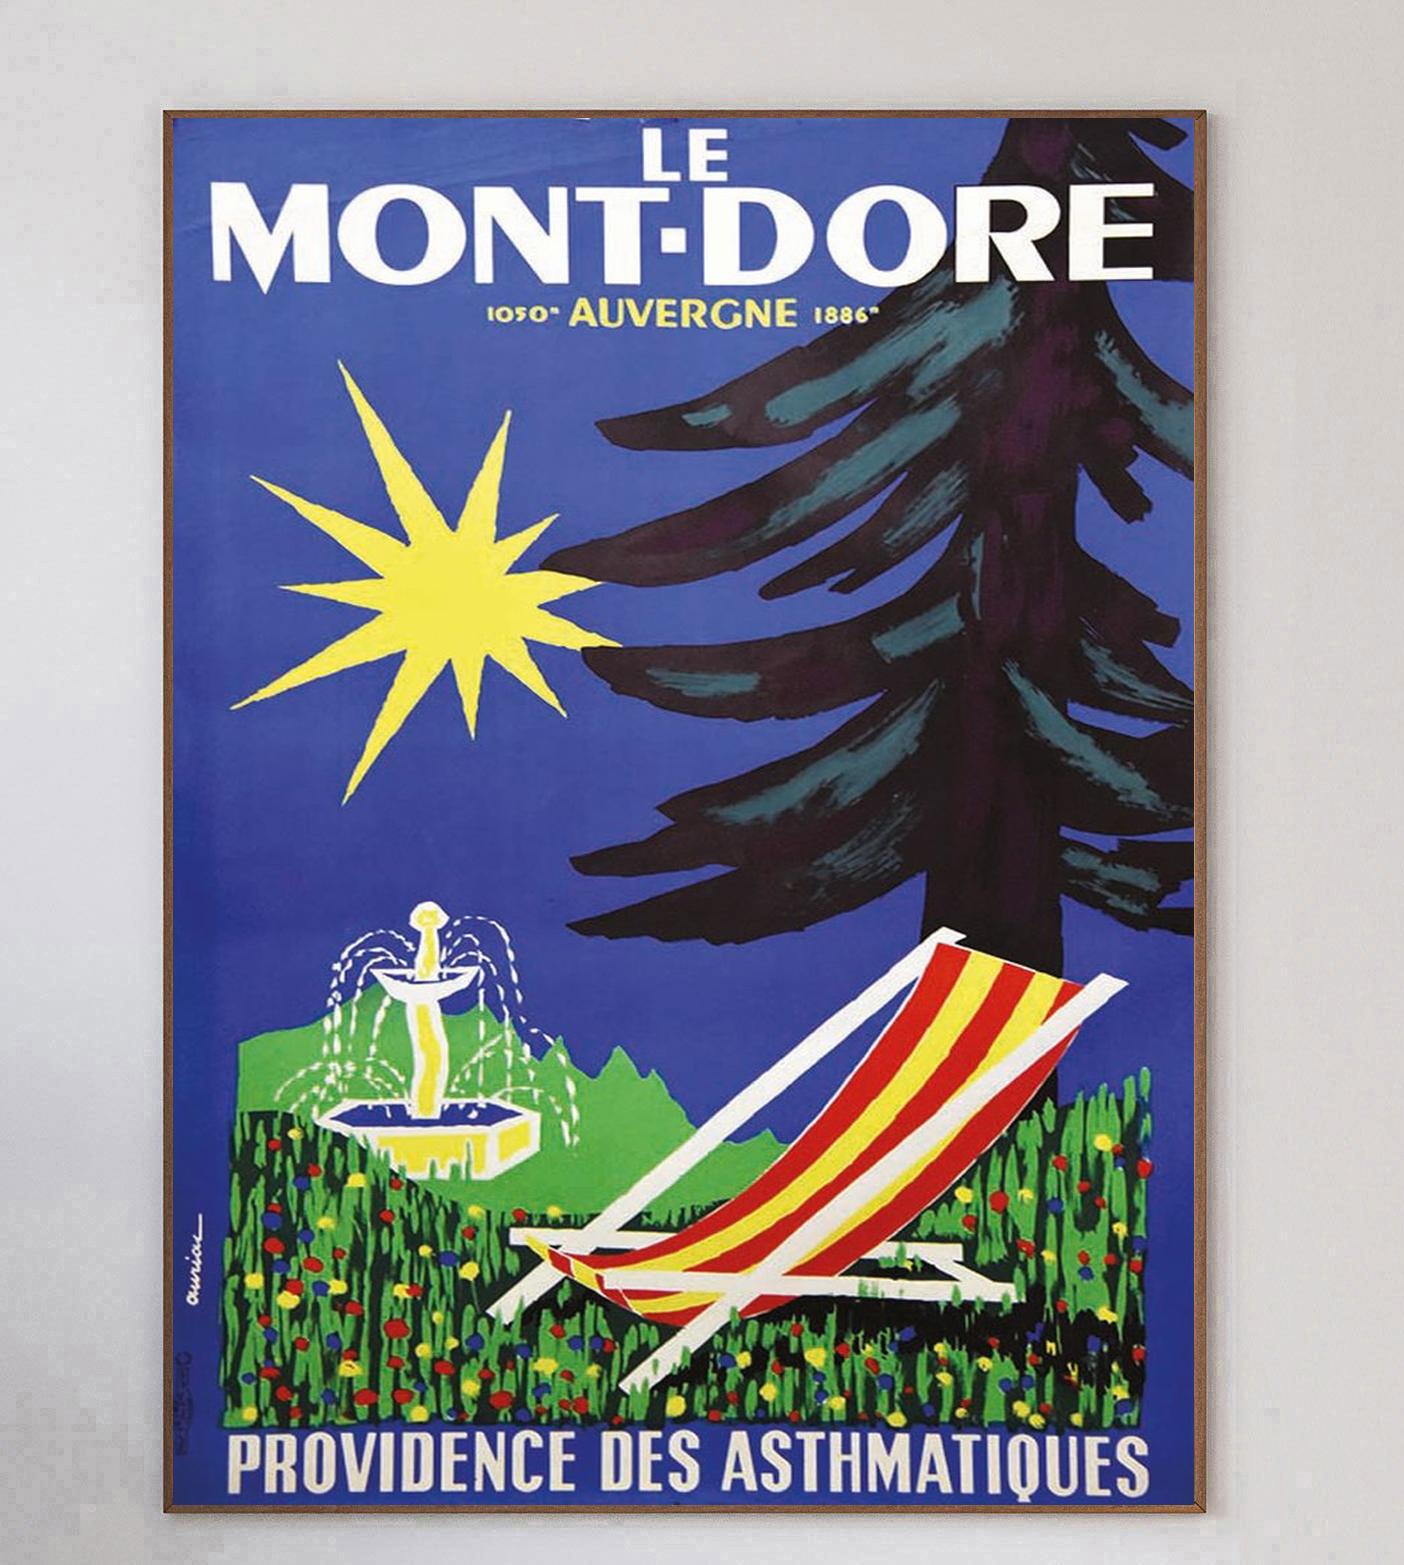 With fabulous artwork from French poster great Jacques Auriac, this lovely  poster was created in 1950 to advertise the Le Monte-Dore area in Auvergne-Rhone-Alpes in central France.

Depicting a bright, sunny day with a deck chair and a fountain